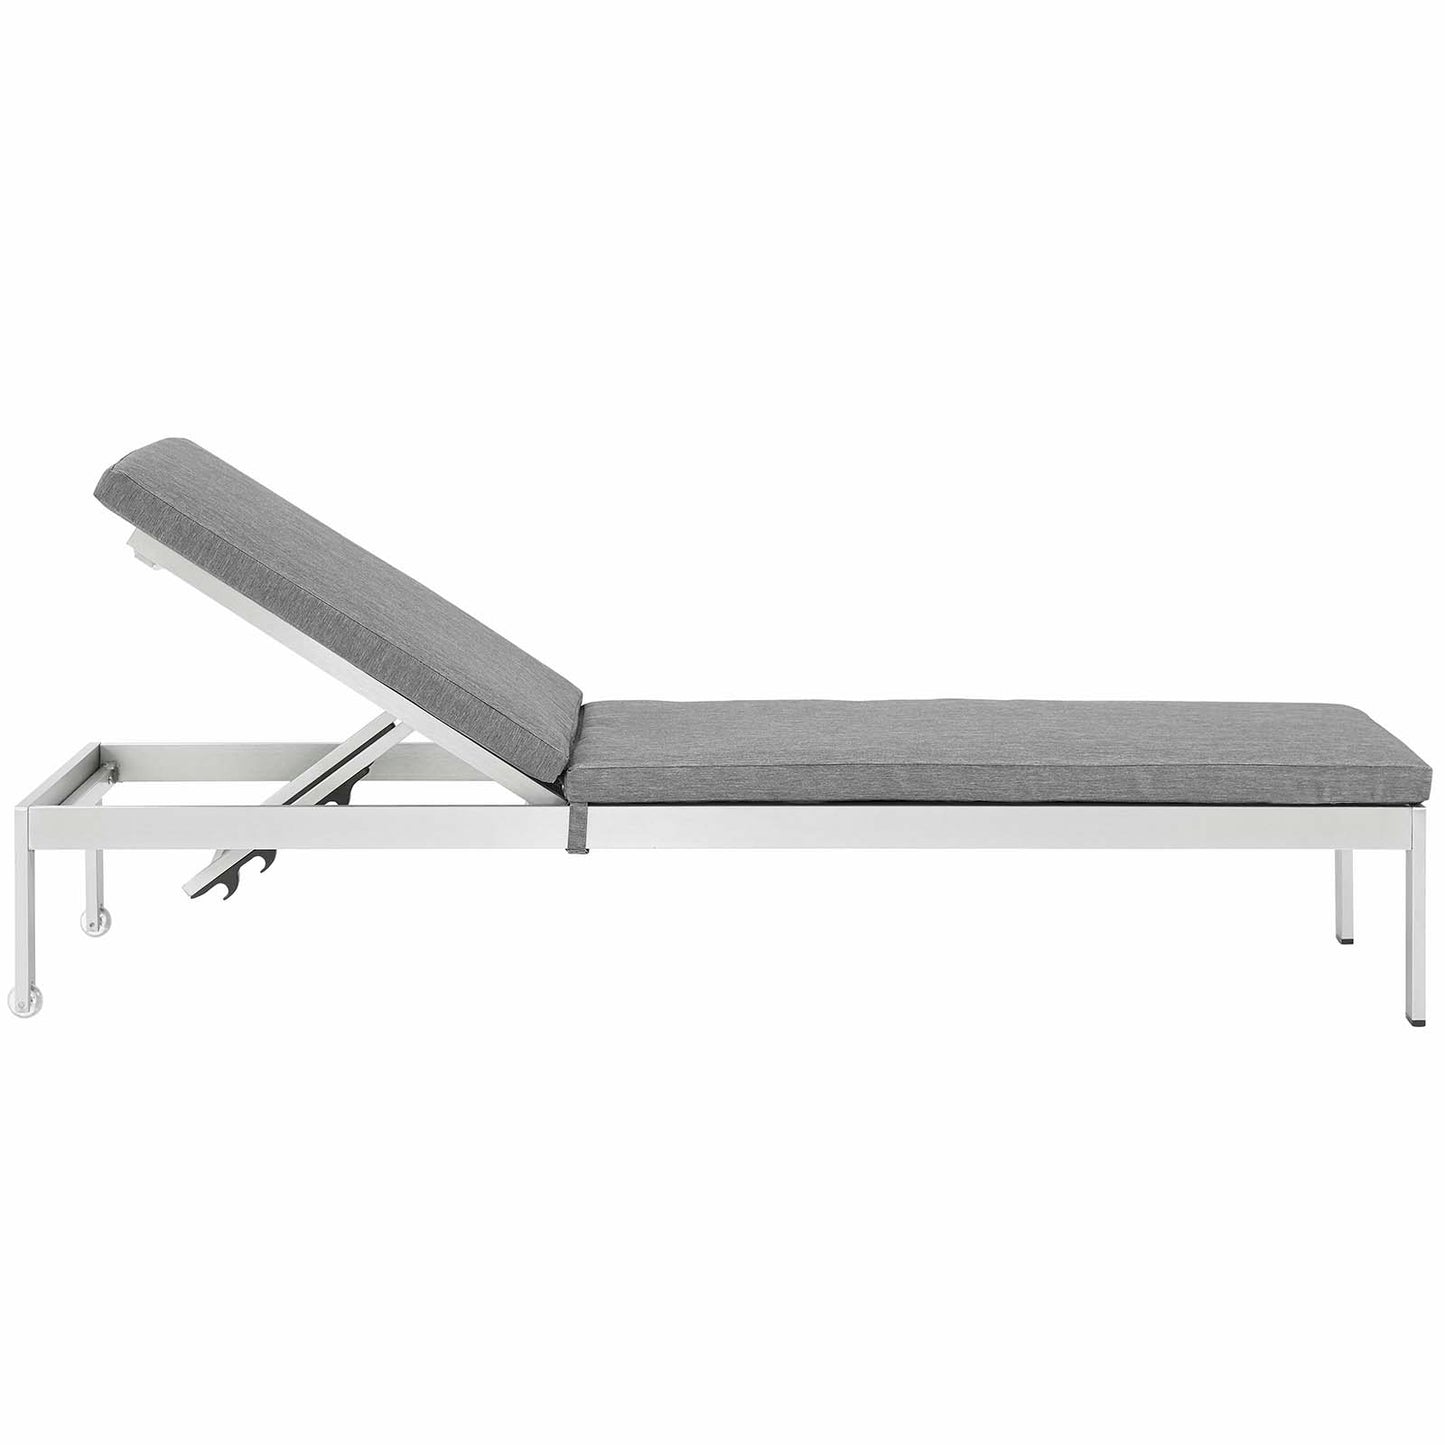 Shore Outdoor Patio Aluminum Chaise with Cushions Silver Gray EEI-4502-SLV-GRY